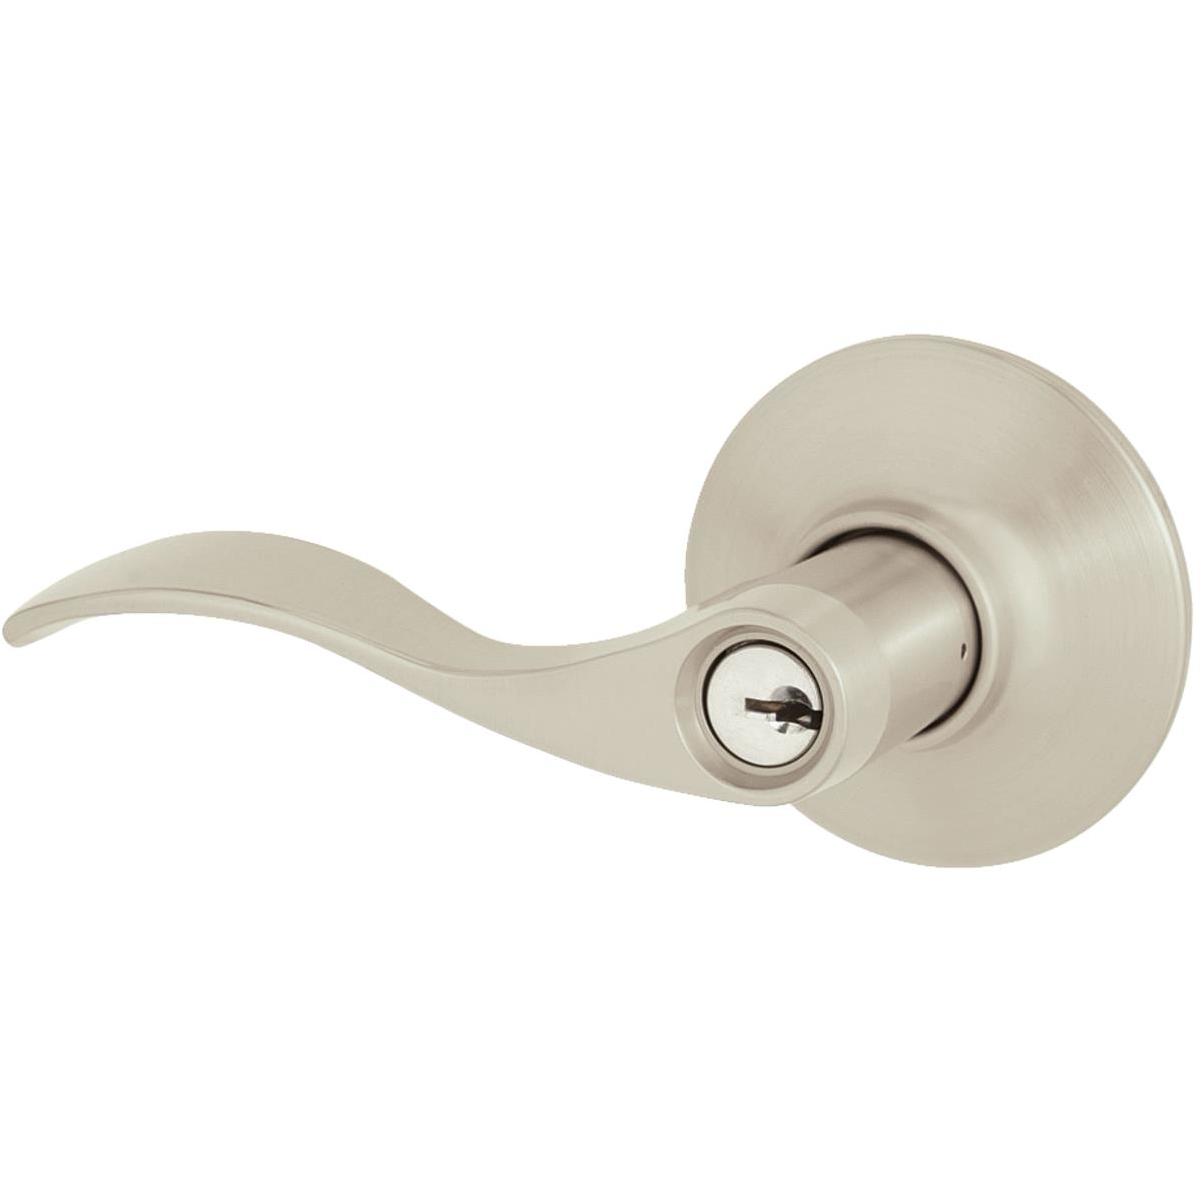 Schlage Bright Brass Single Cylinder Deadbolt and Plymouth Keyed